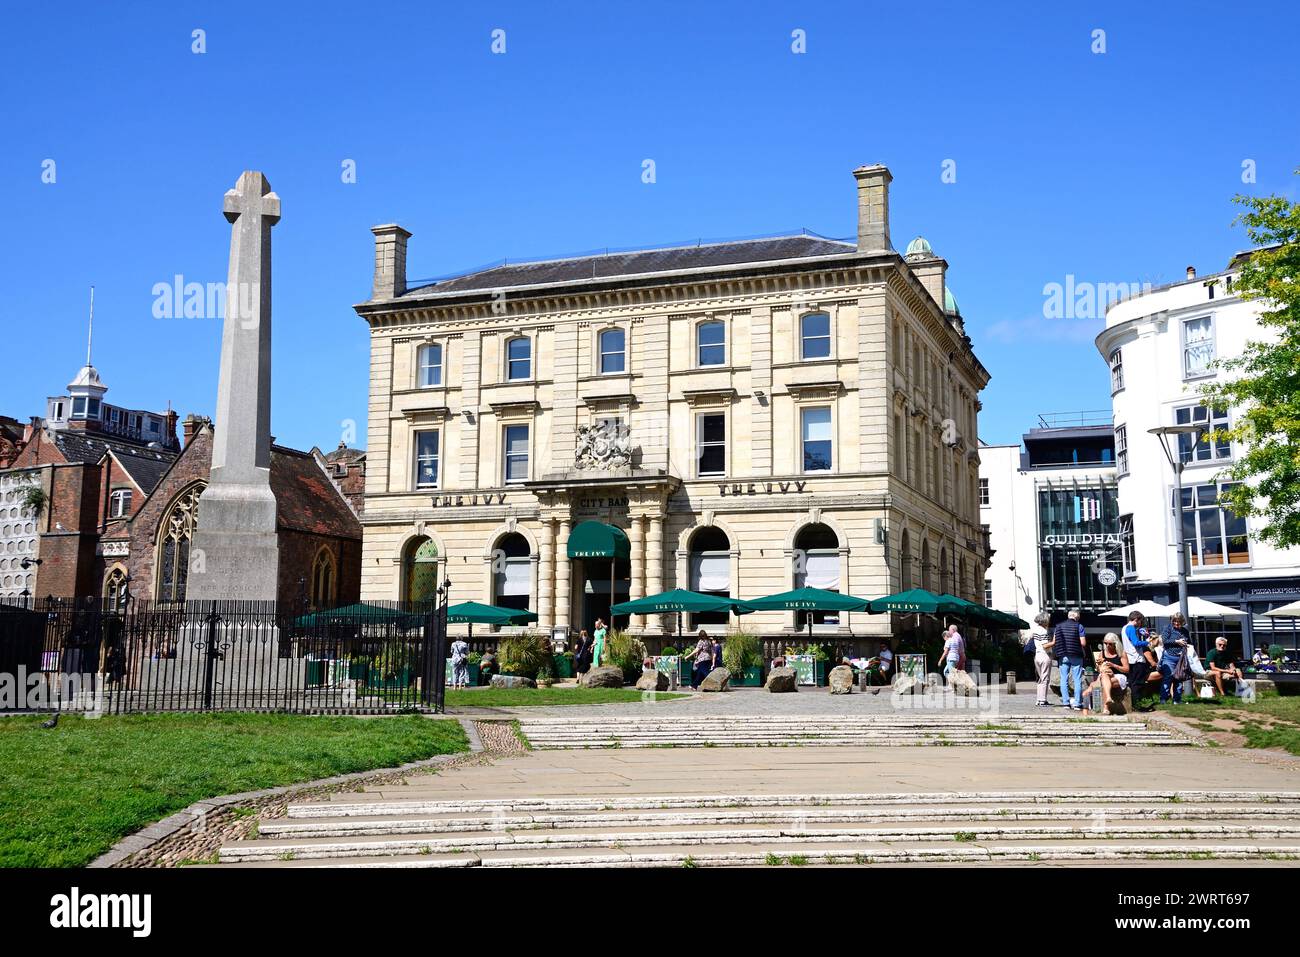 View of The Ivy Bistro and St Pentrock church along Cathedral Yard with a war memorial in the foreground, Exeter, Devon, UK, Europe. Stock Photo